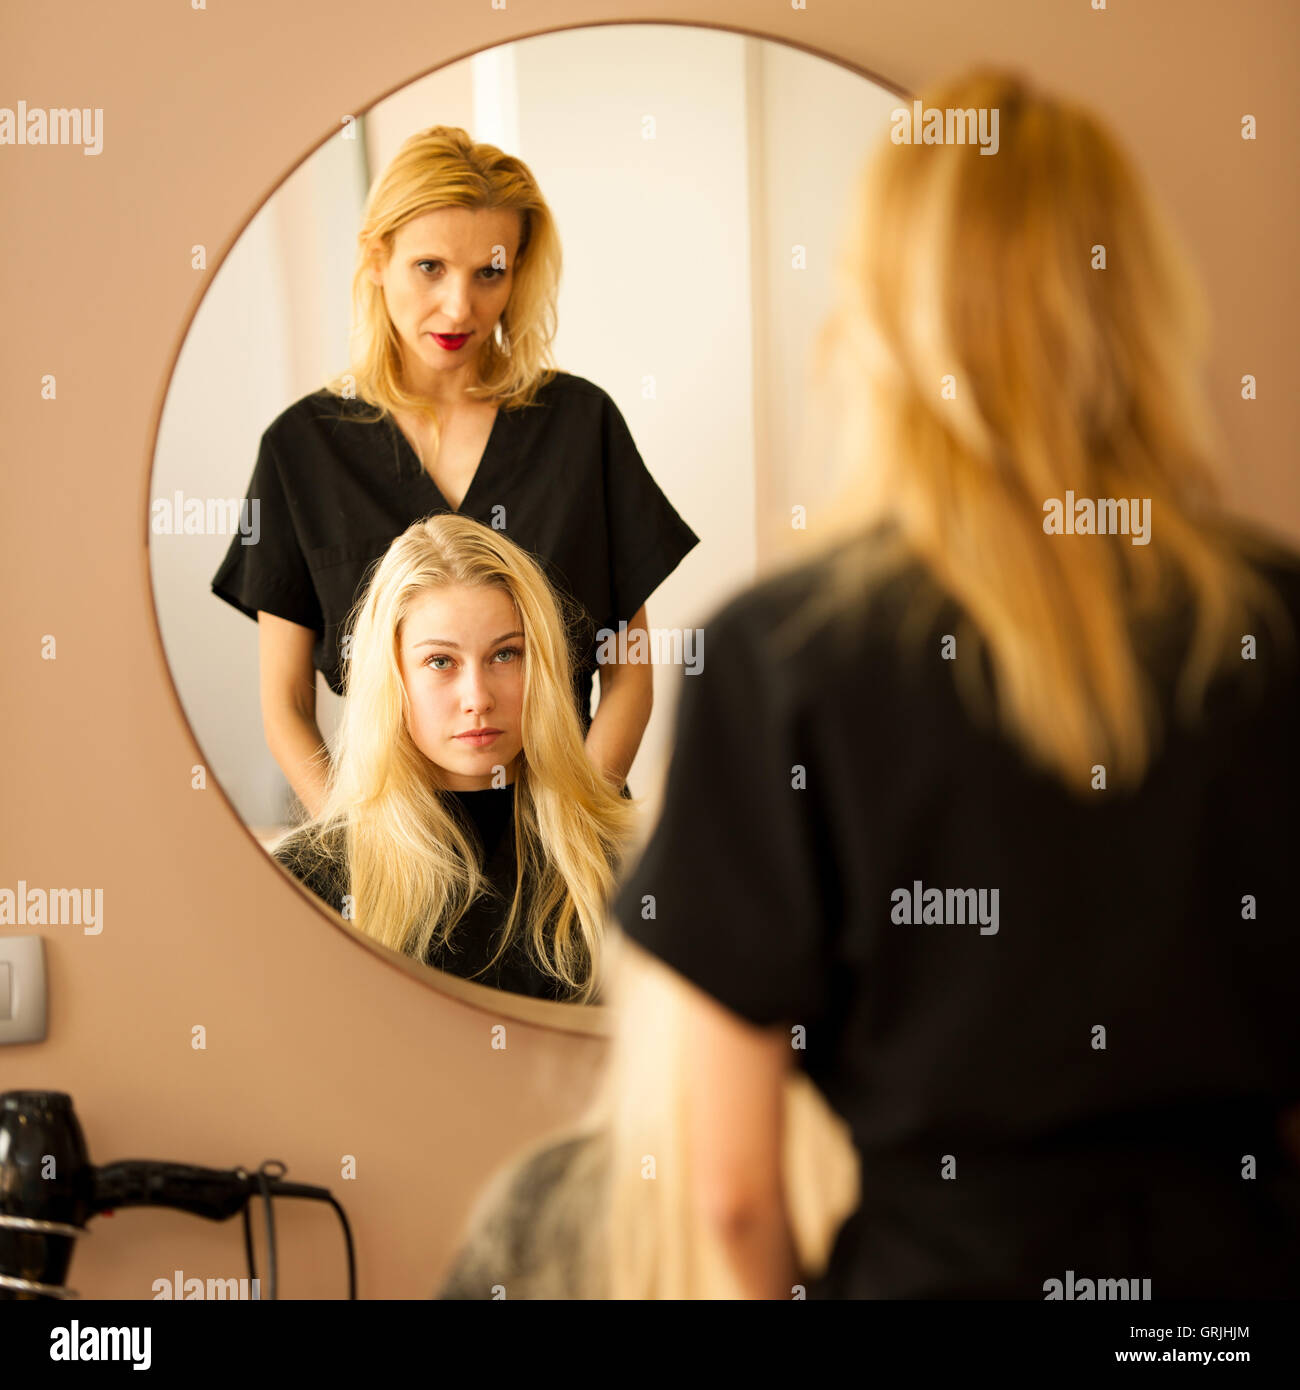 In hairdresser salon - hair stylist consulting a customer before doing her hairstyle Stock Photo